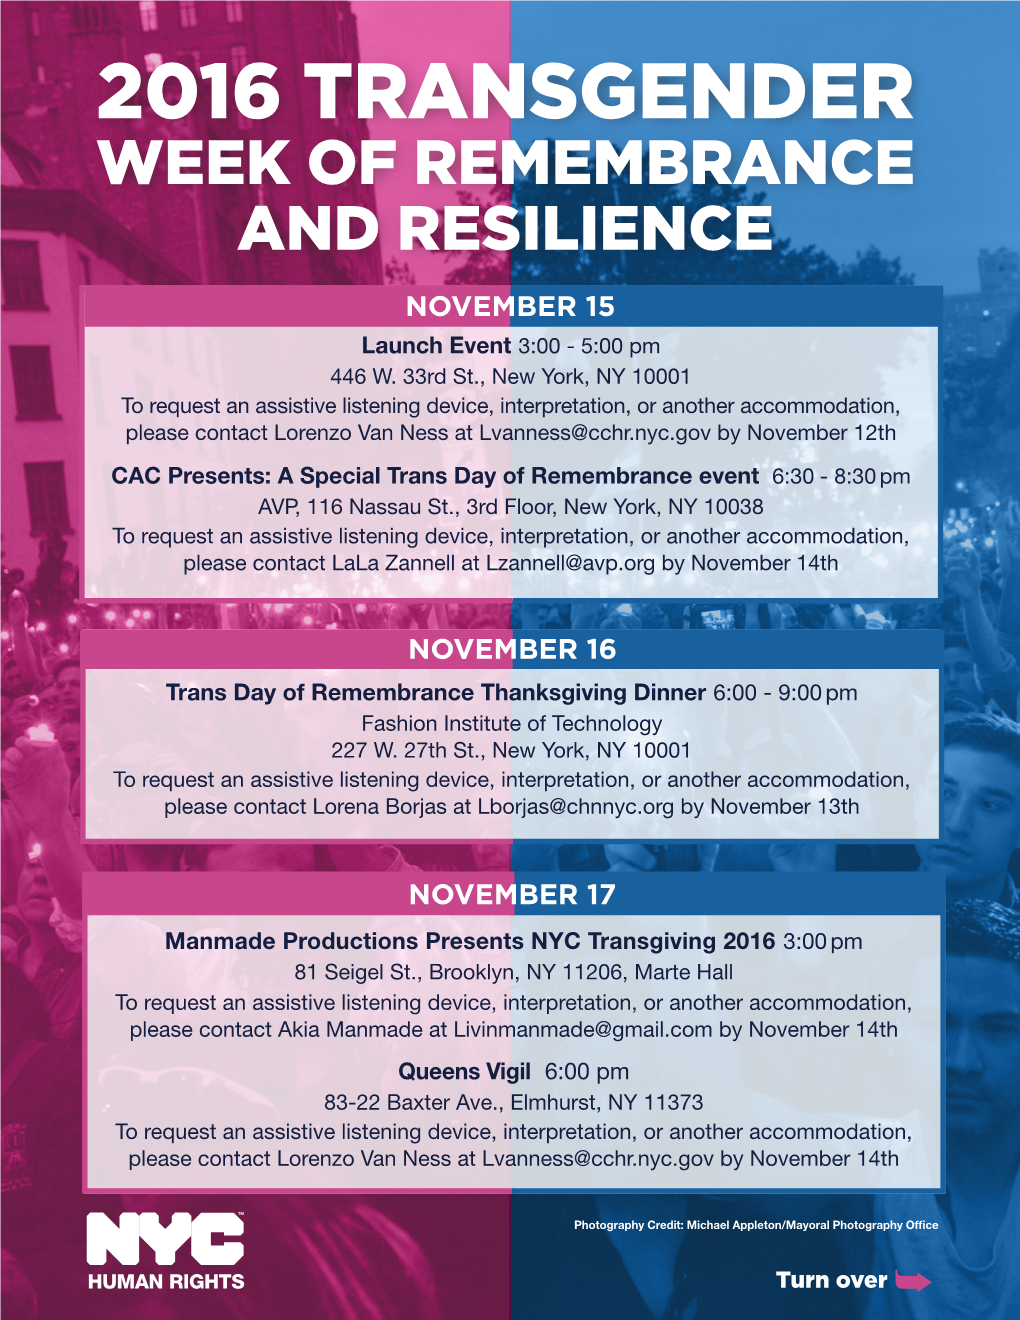 2016 Transgender Week of Remembrance and Resilience